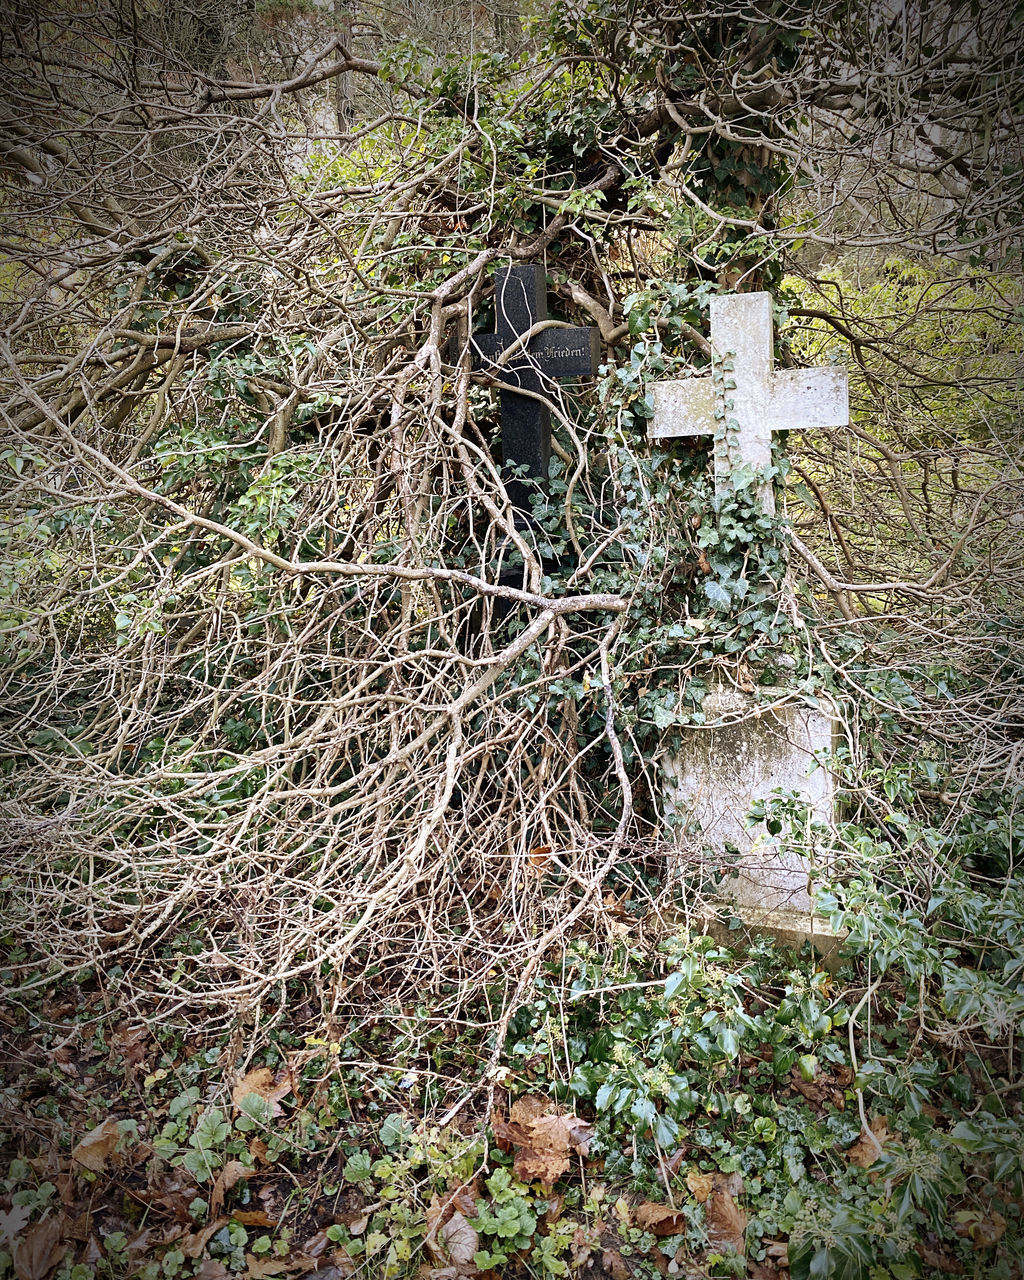 grave, plant, cemetery, no people, day, nature, woodland, tree, forest, land, green, outdoors, grass, religion, high angle view, cross, field, leaf, death, belief, spirituality, growth, tombstone, tranquility, stone, flower